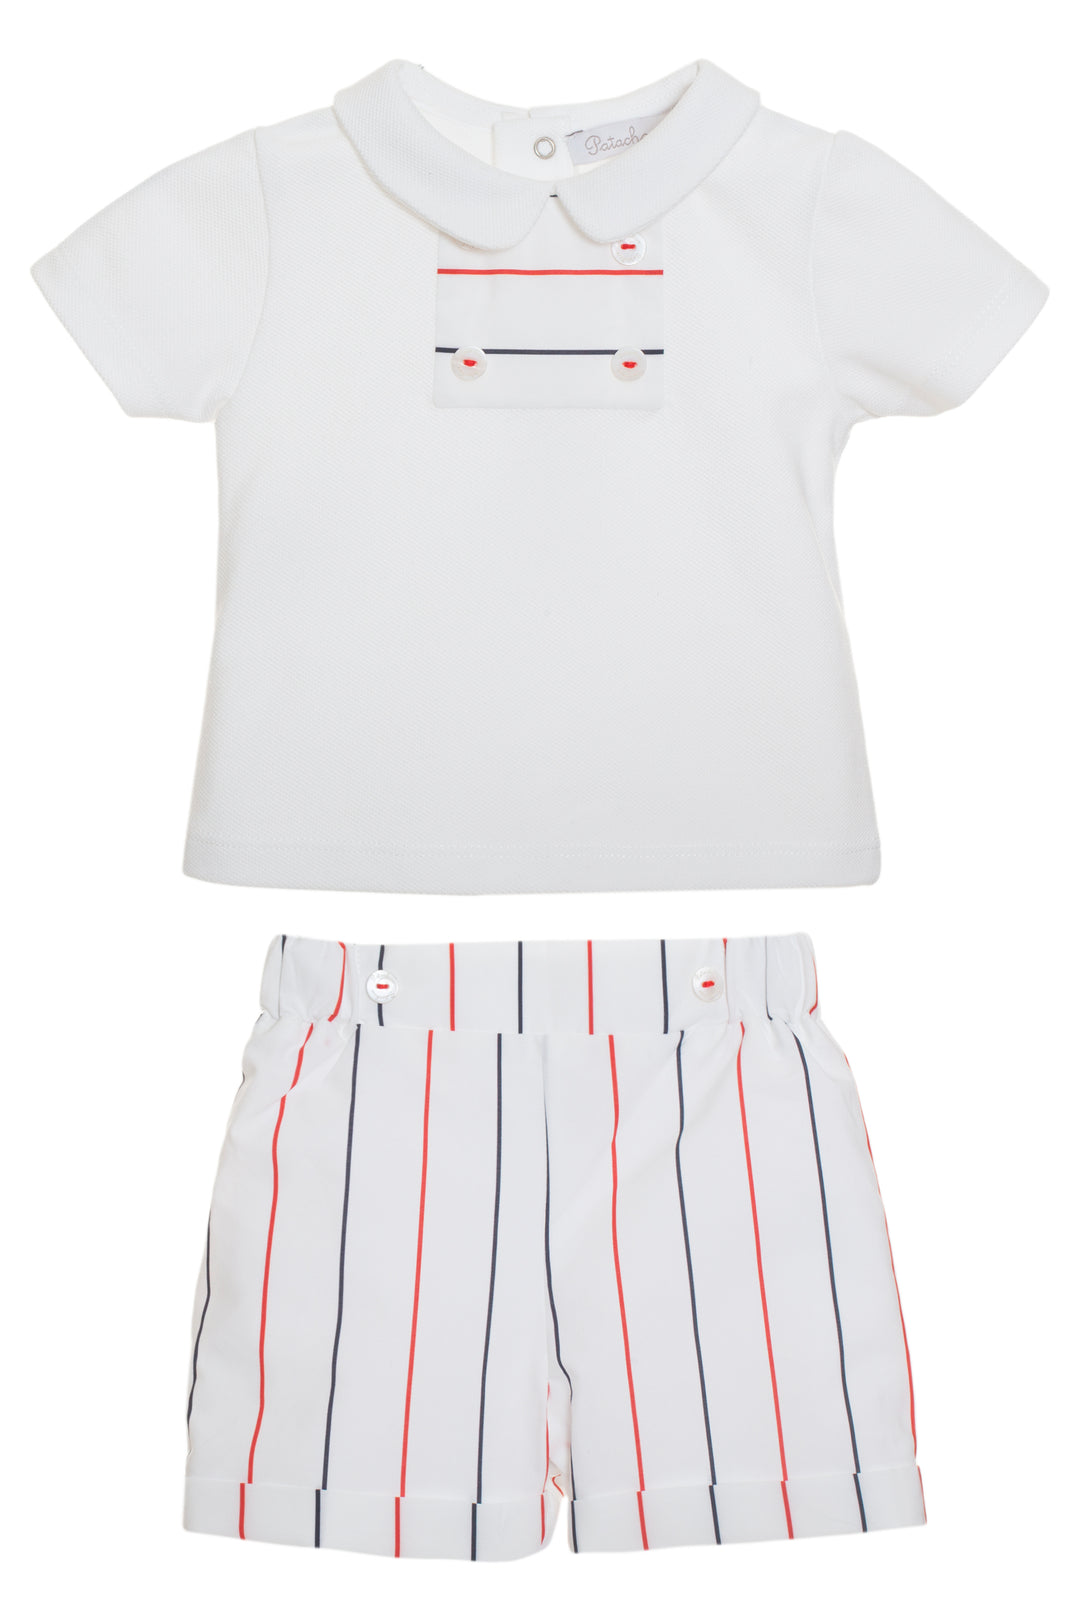 Patachou "Sonny" Red & Navy Striped Top & Shorts | Millie and John